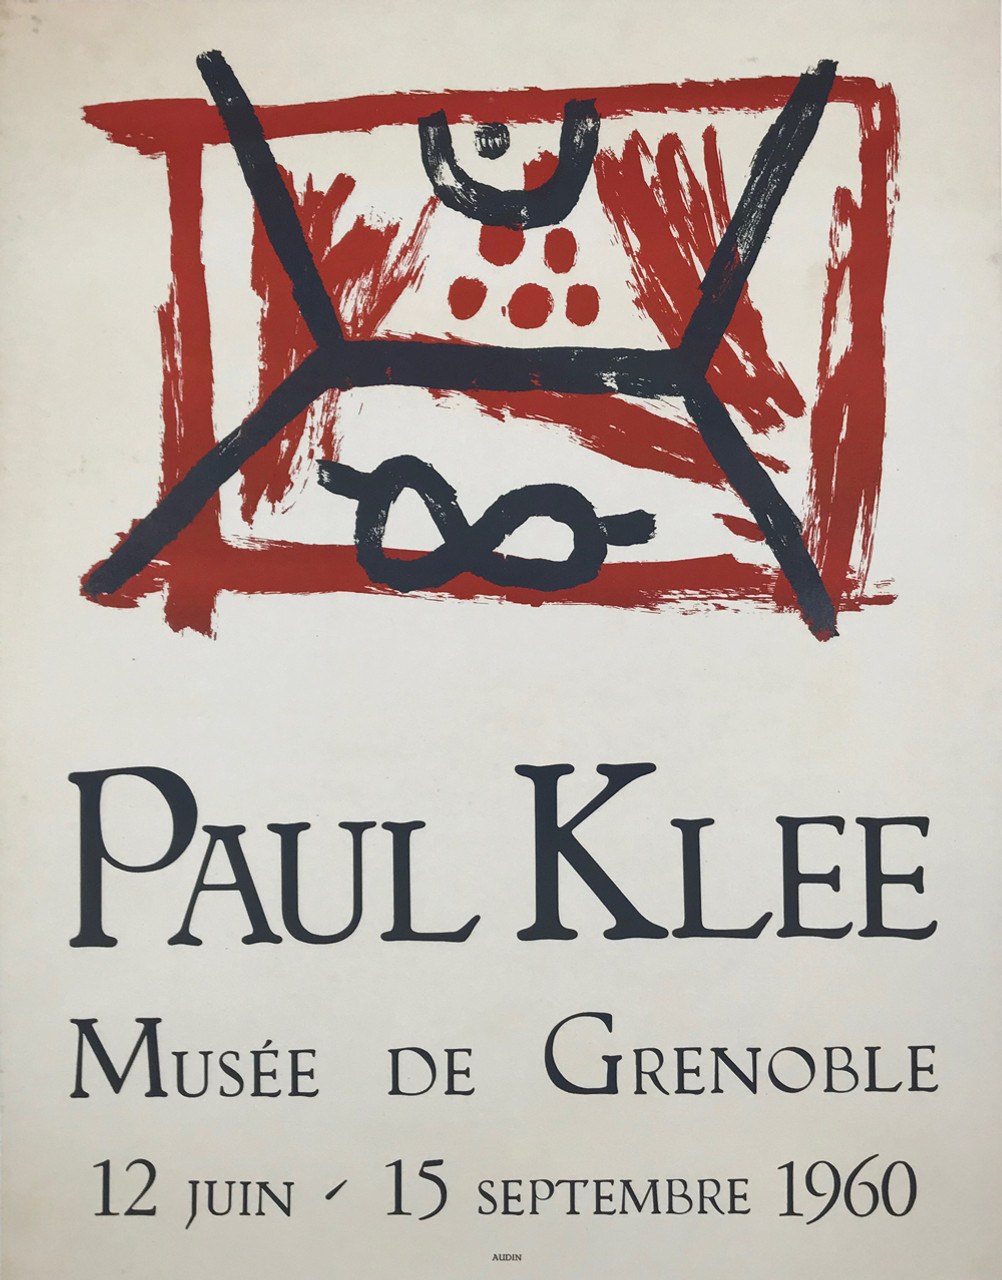 Paul Klee Musee De Grenoble by Imp. Audin Original 1960 Vintage France Gallery Exhibition Show Advertisement Poster Linen Backed.